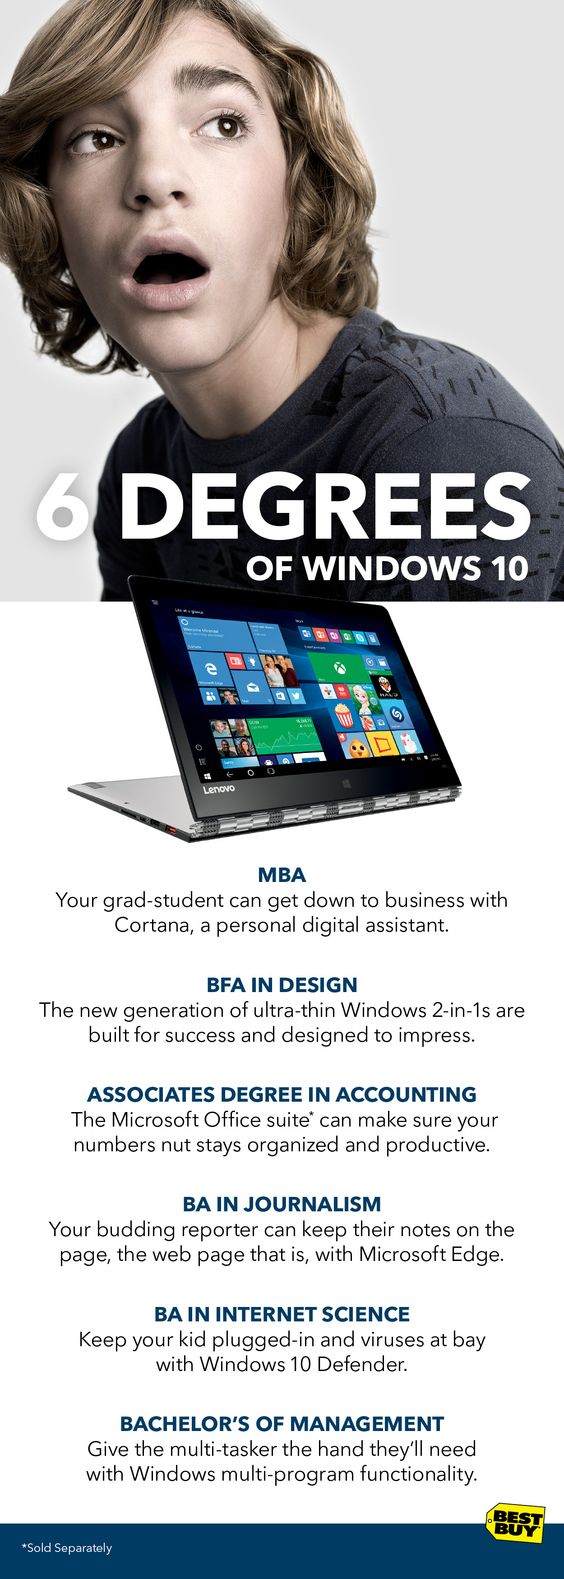 Now’s the time students start thinking about what’s next. Maybe they’re on their way to college. Maybe they’re heading off into the real world. Either way they’ll need all the support they can get. And whatever their degree, Windows 10 is designed to help them succeed. This isn’t just an operating system, it’s a life hack built to make anyone do more. Look to Best Buy to find out 